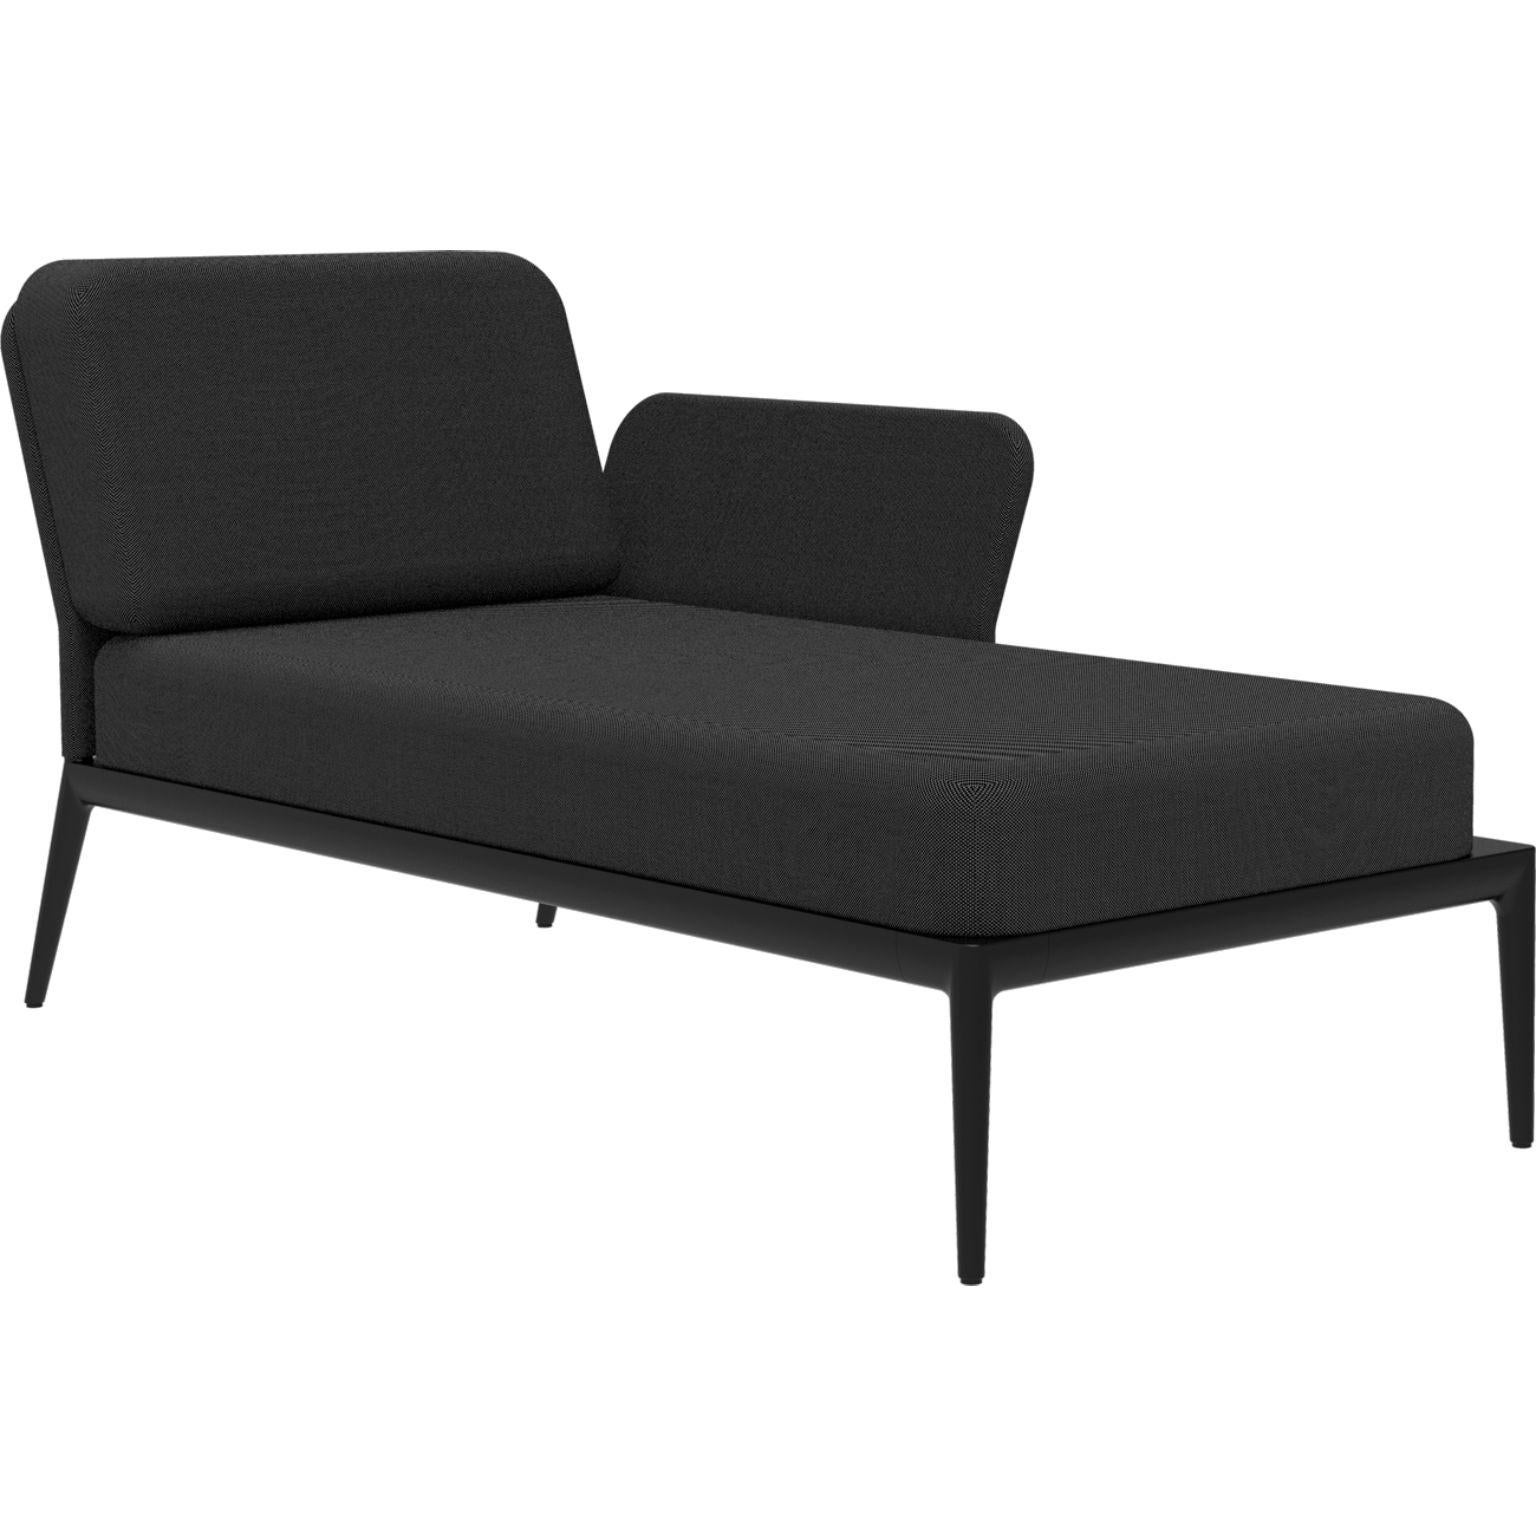 Cover Black Left Chaise Longue by MOWEE
Dimensions: D80 x W155 x H81 cm (seat height 42 cm).
Material: Aluminum and upholstery.
Weight: 28 kg.
Also available in different colors and finishes. Please contact us.

An unmistakable collection for